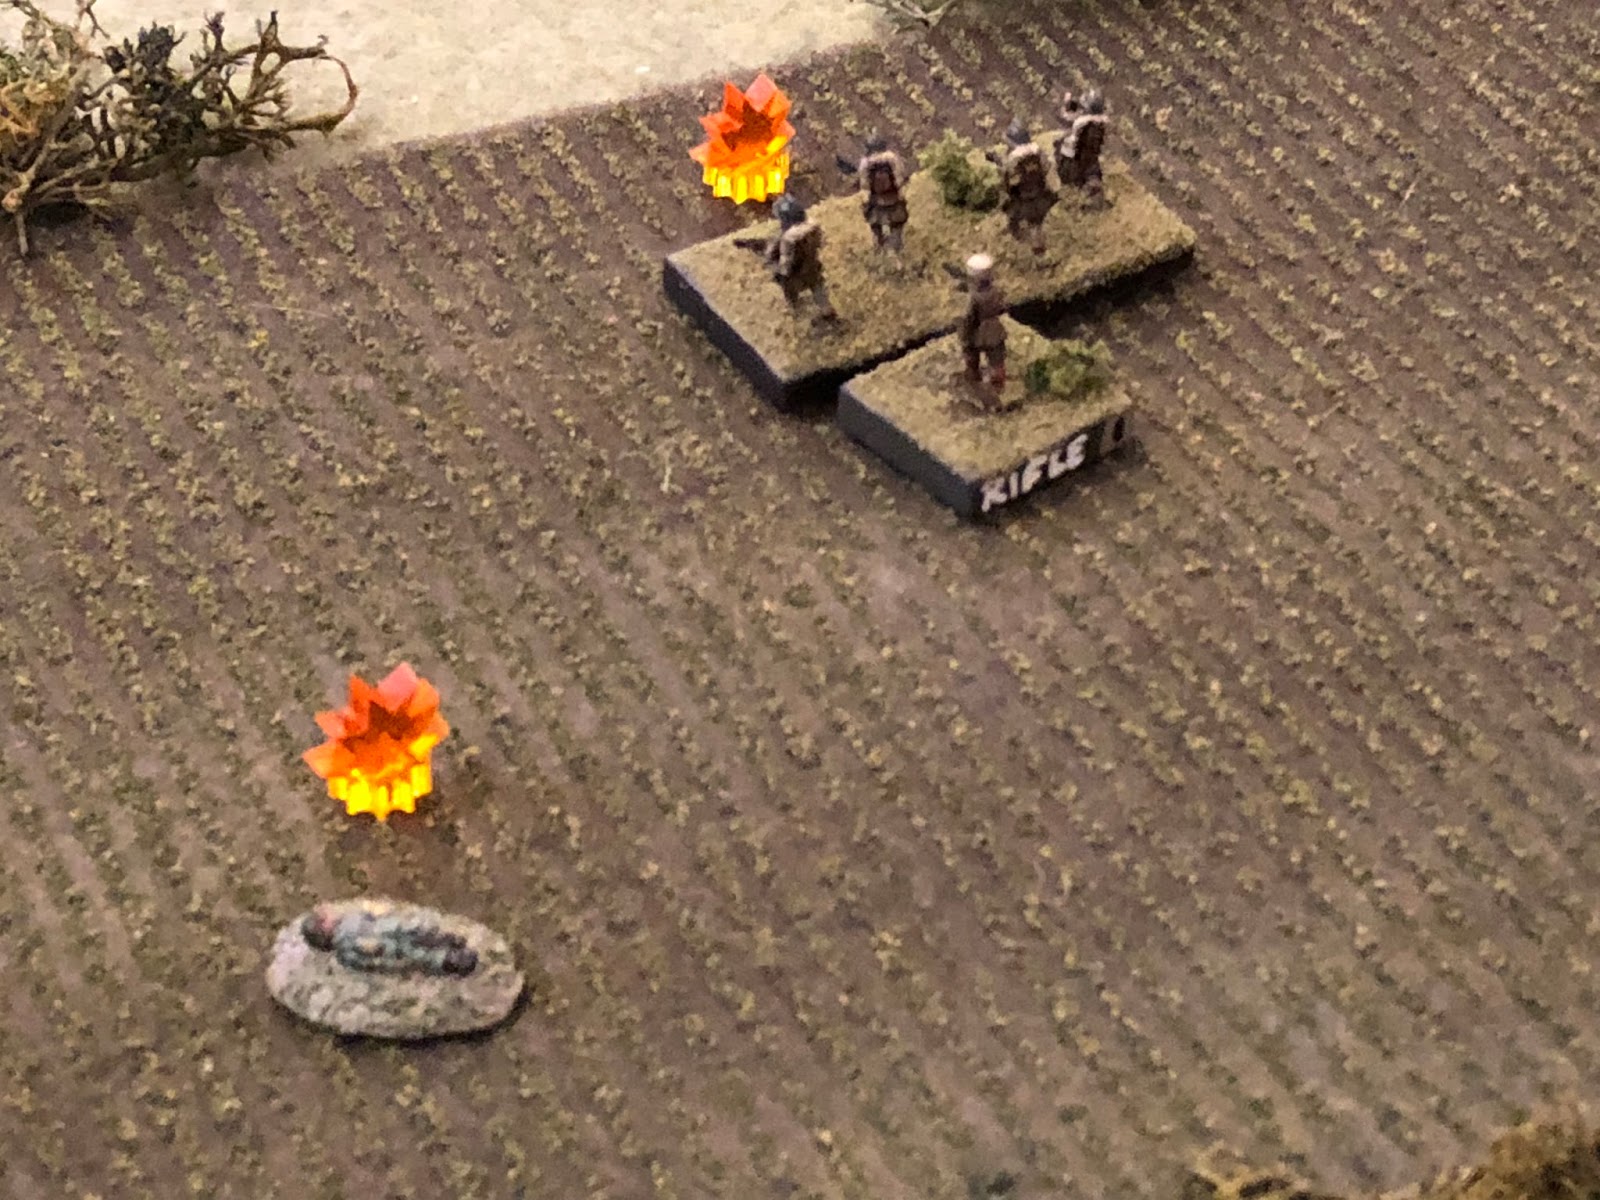  But the fire from the other two Motorcycle Platoon squads is vicious, knocking a French squad out of the fight!  All this shooting, but so far all that's been lost is one German ATG and one French rifle squad. 